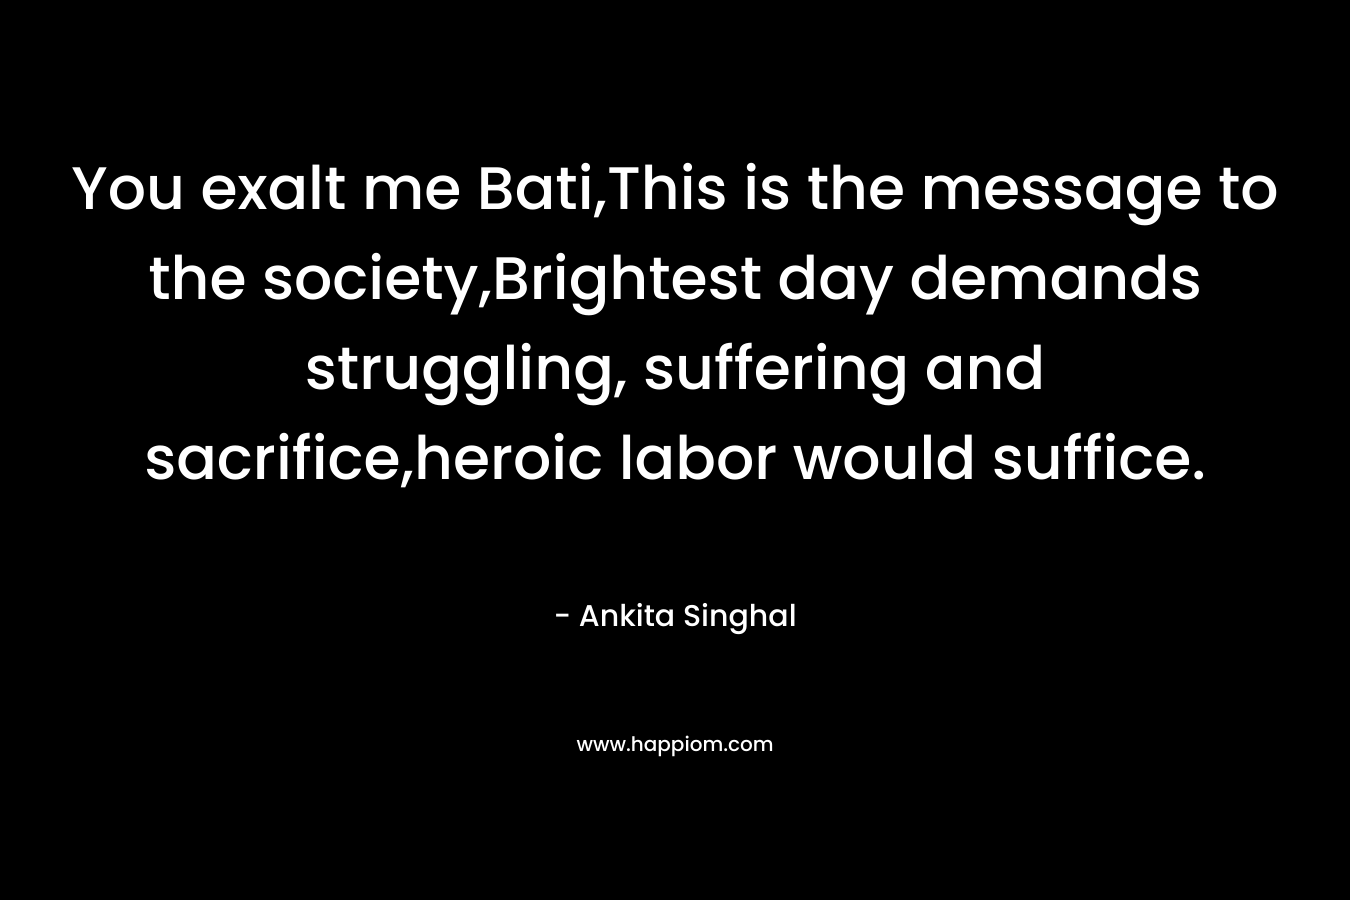 You exalt me Bati,This is the message to the society,Brightest day demands struggling, suffering and sacrifice,heroic labor would suffice. – Ankita Singhal